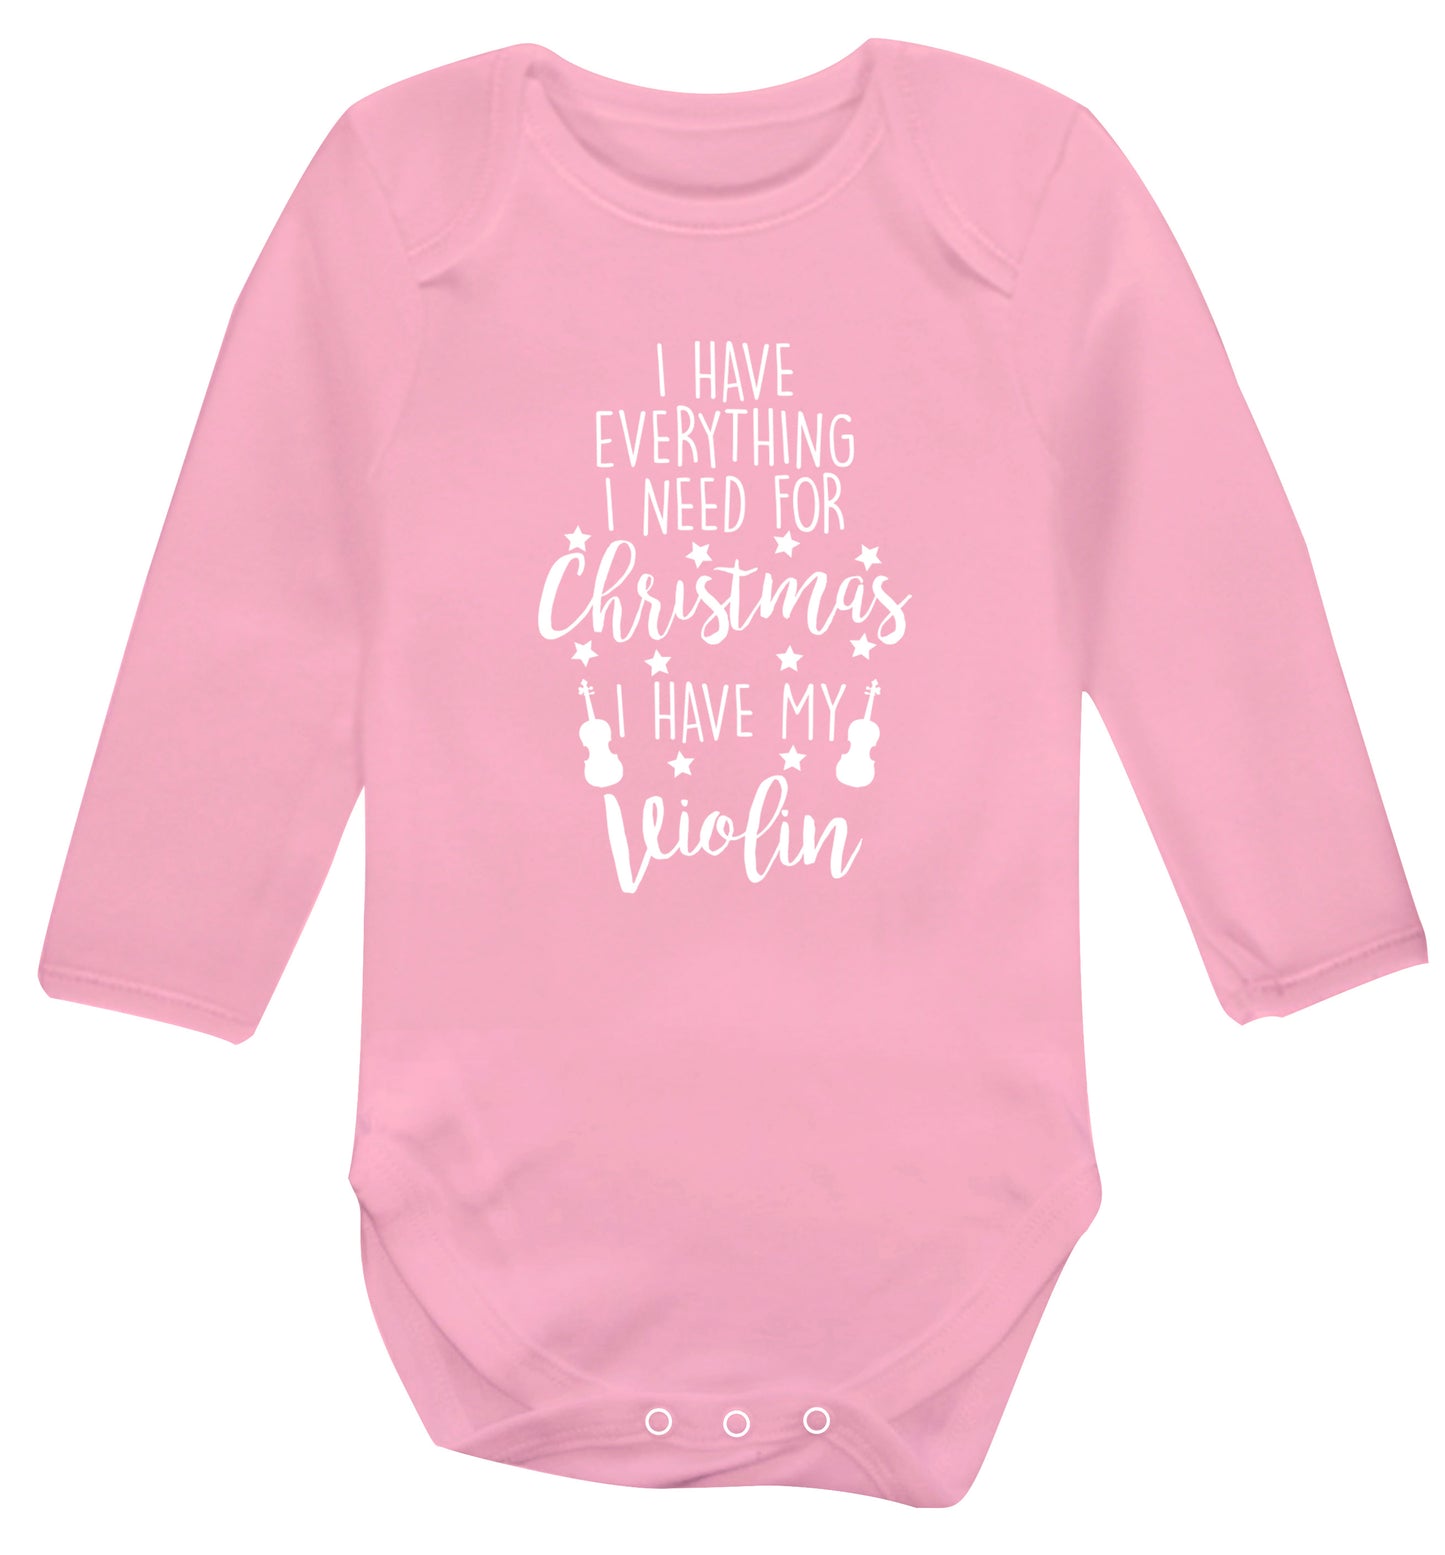 I have everything I need for Christmas I have my violin Baby Vest long sleeved pale pink 6-12 months